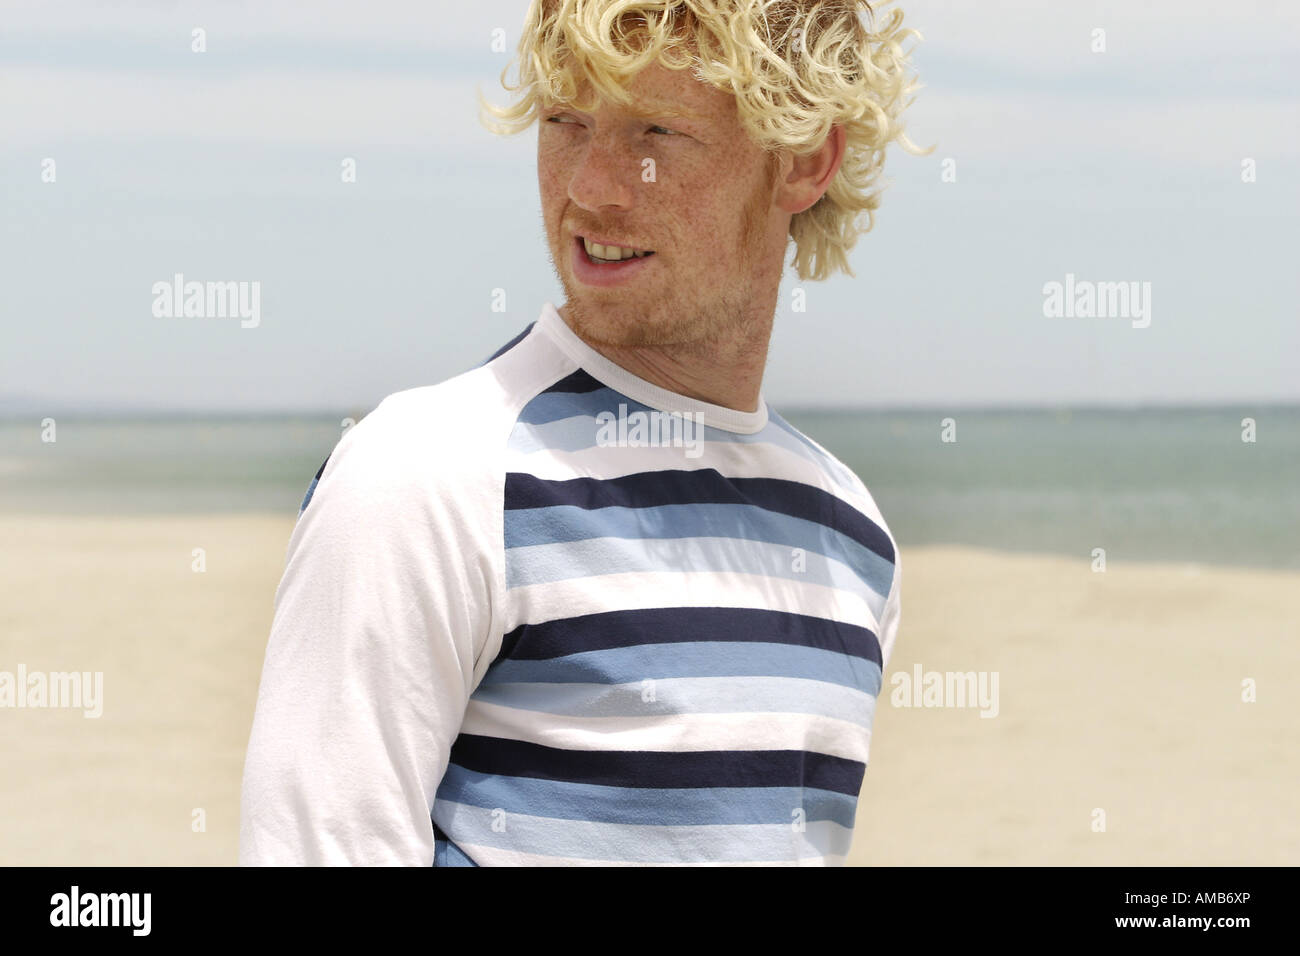 Joung Blond Man With A Three Day Beard At The Beach Stock Photo Alamy